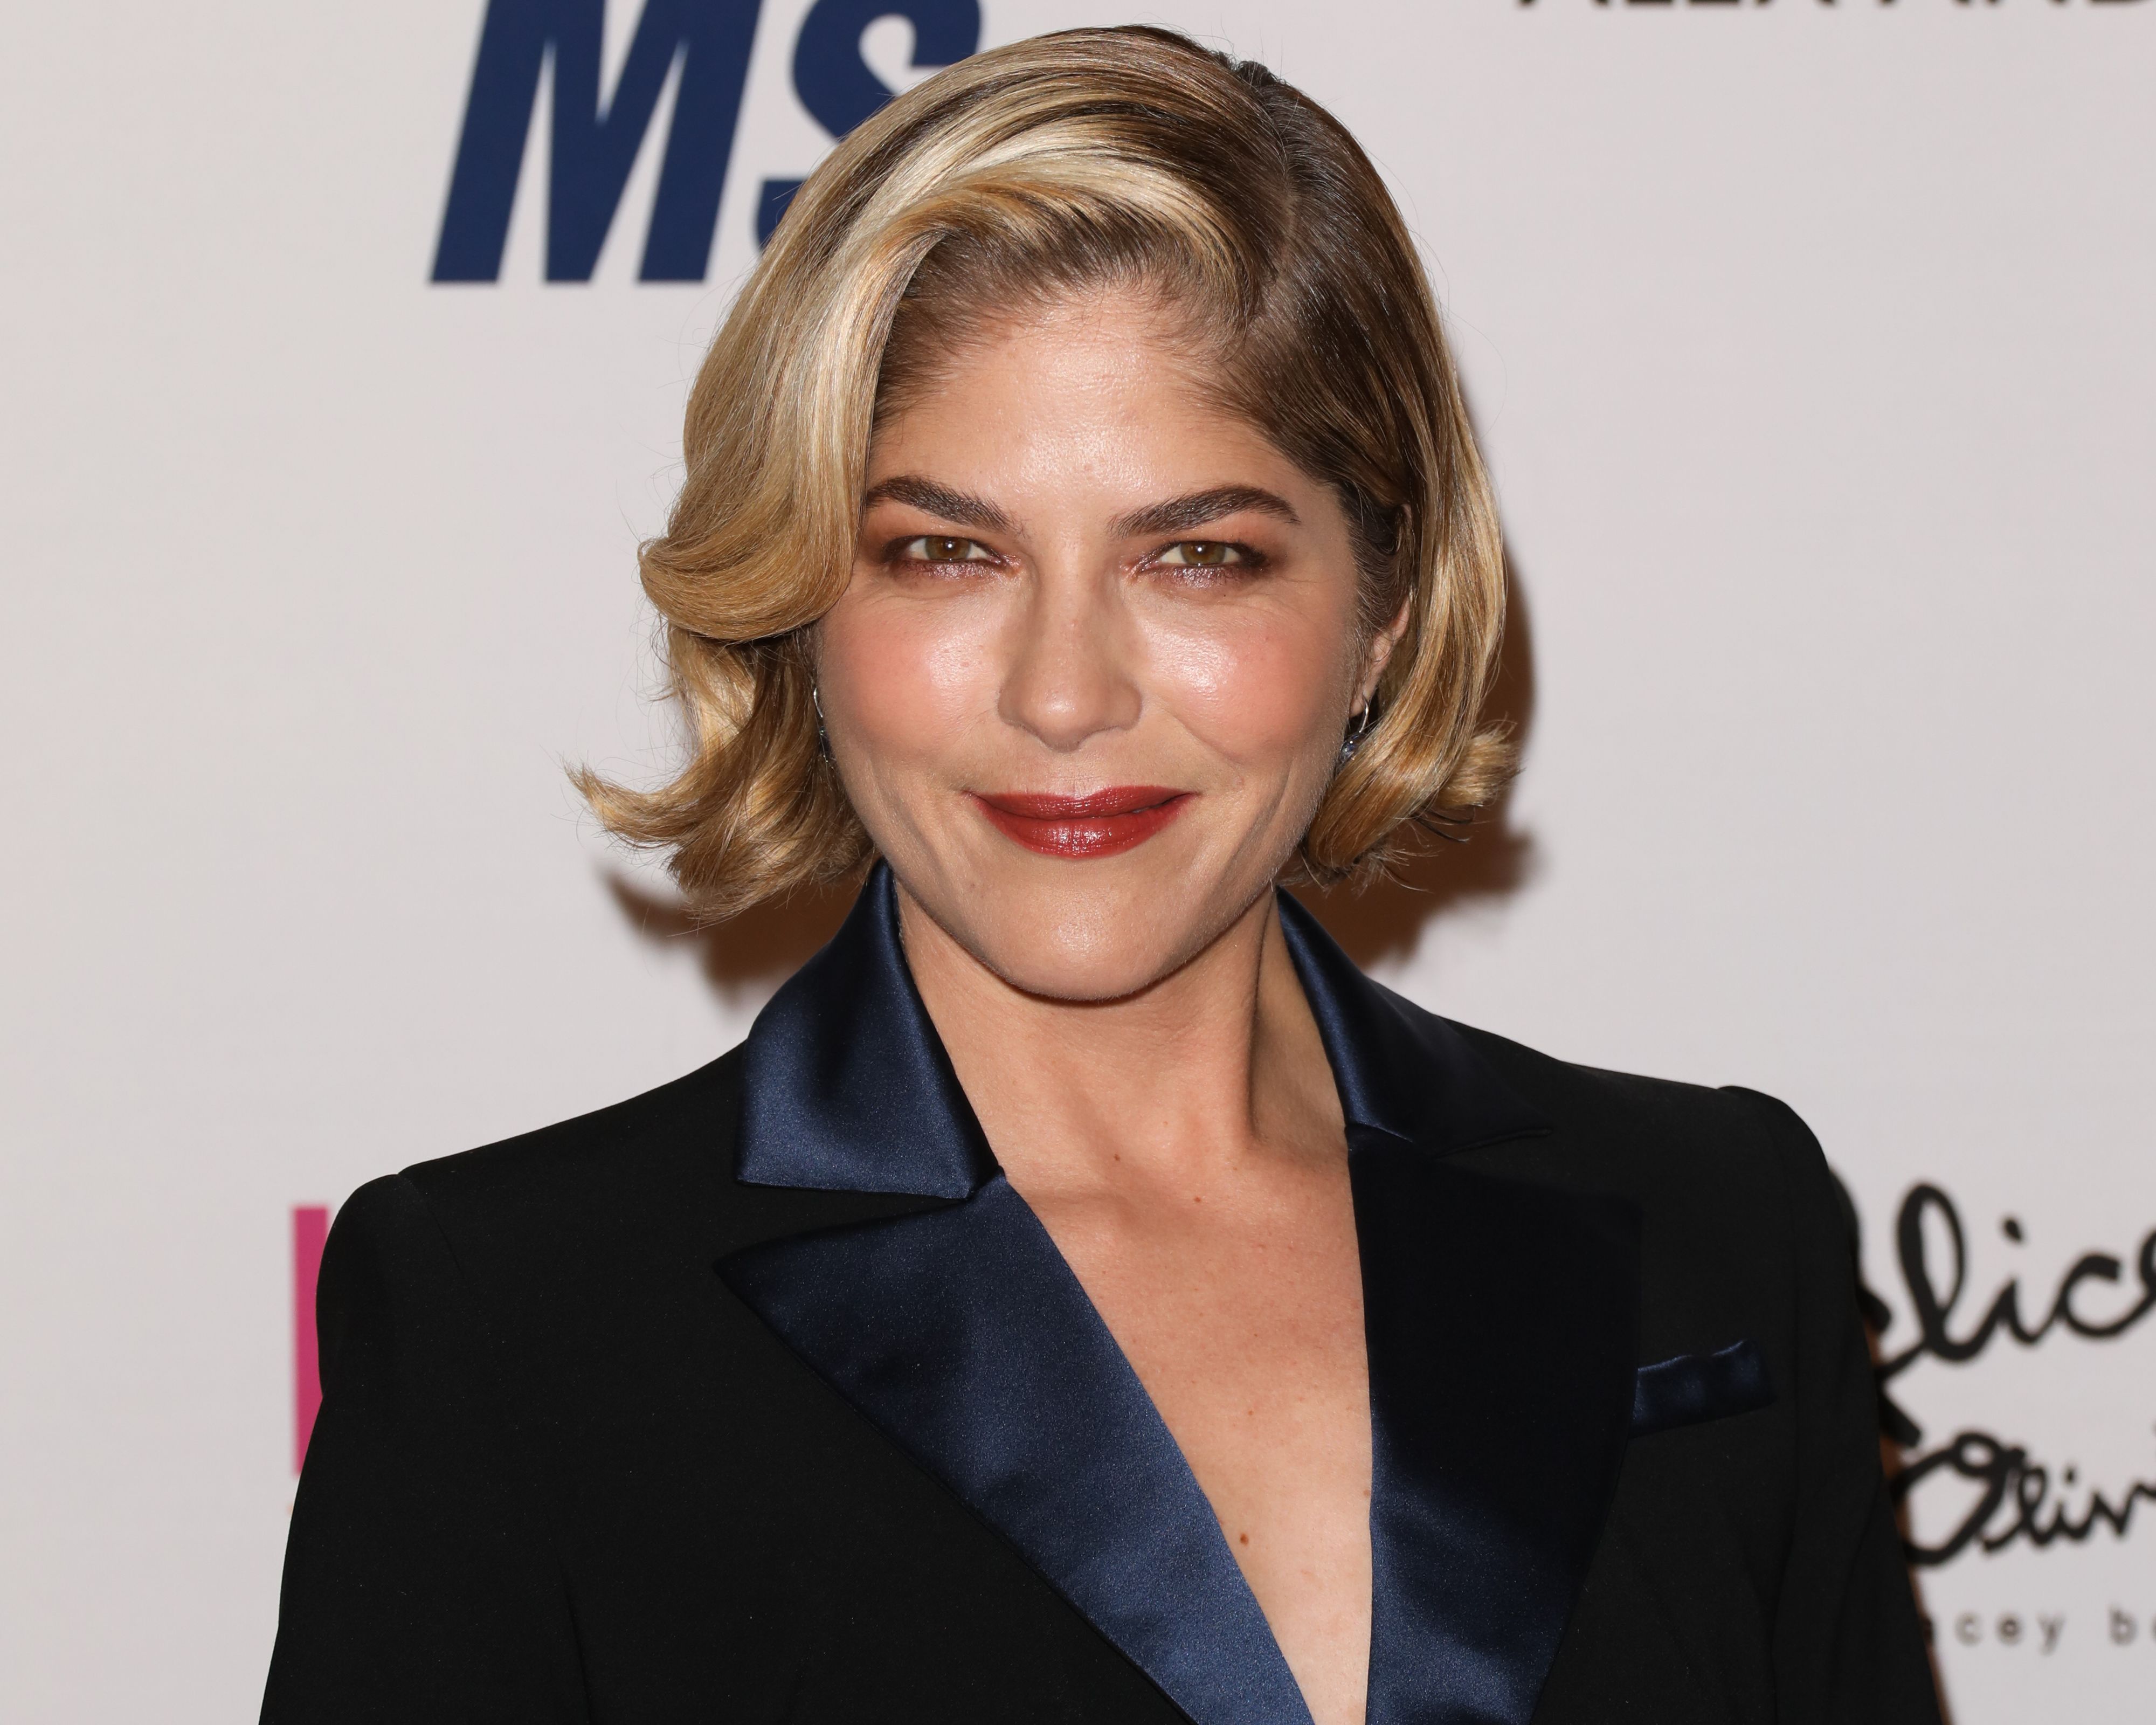 Selma Blair during the 26th annual Race To Erase MS Gala at The Beverly Hilton Hotel on May 10, 2019 in Beverly Hills, California. | Source: Getty Images